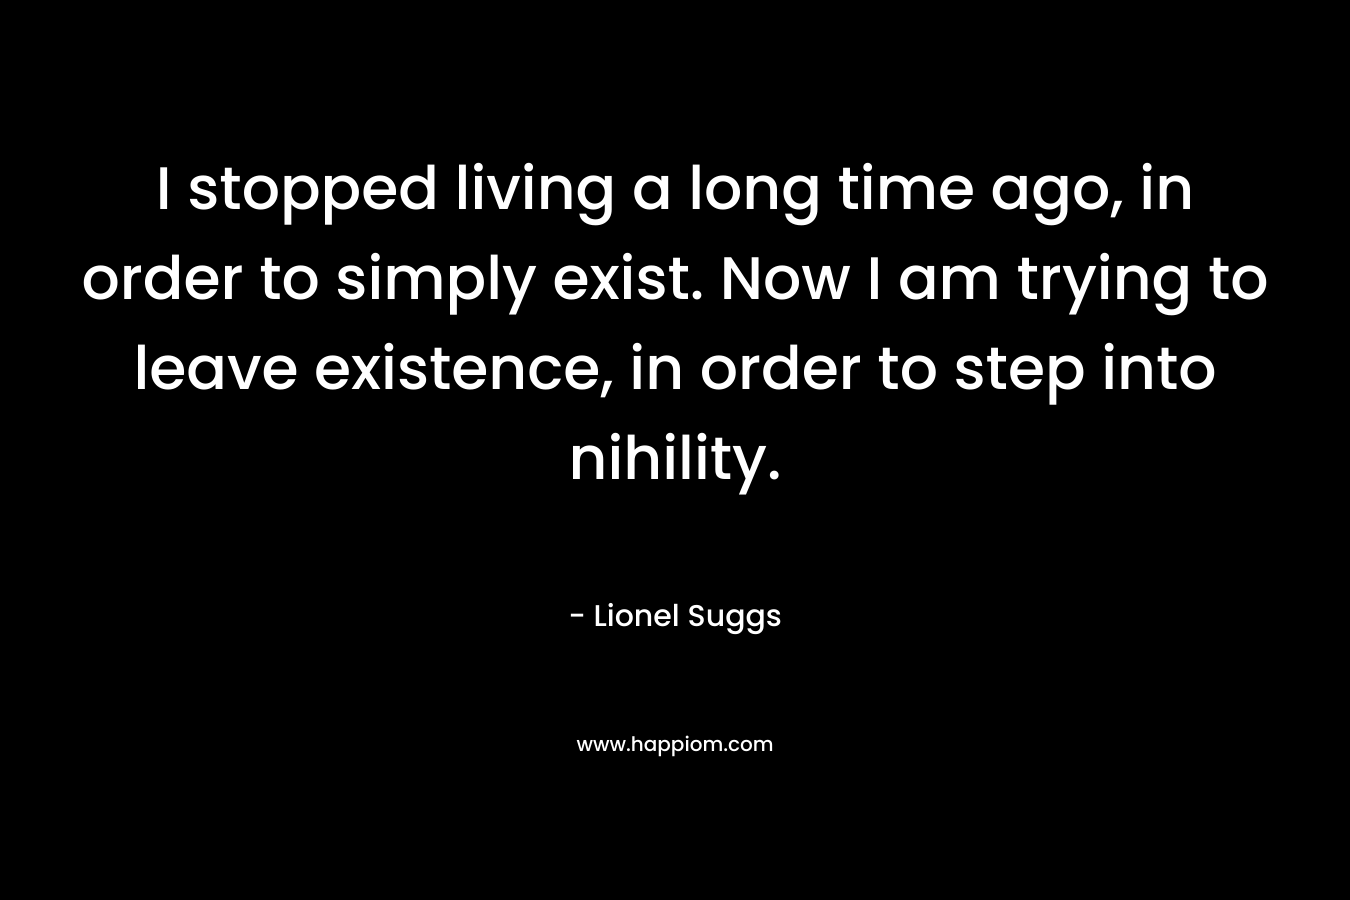 I stopped living a long time ago, in order to simply exist. Now I am trying to leave existence, in order to step into nihility.